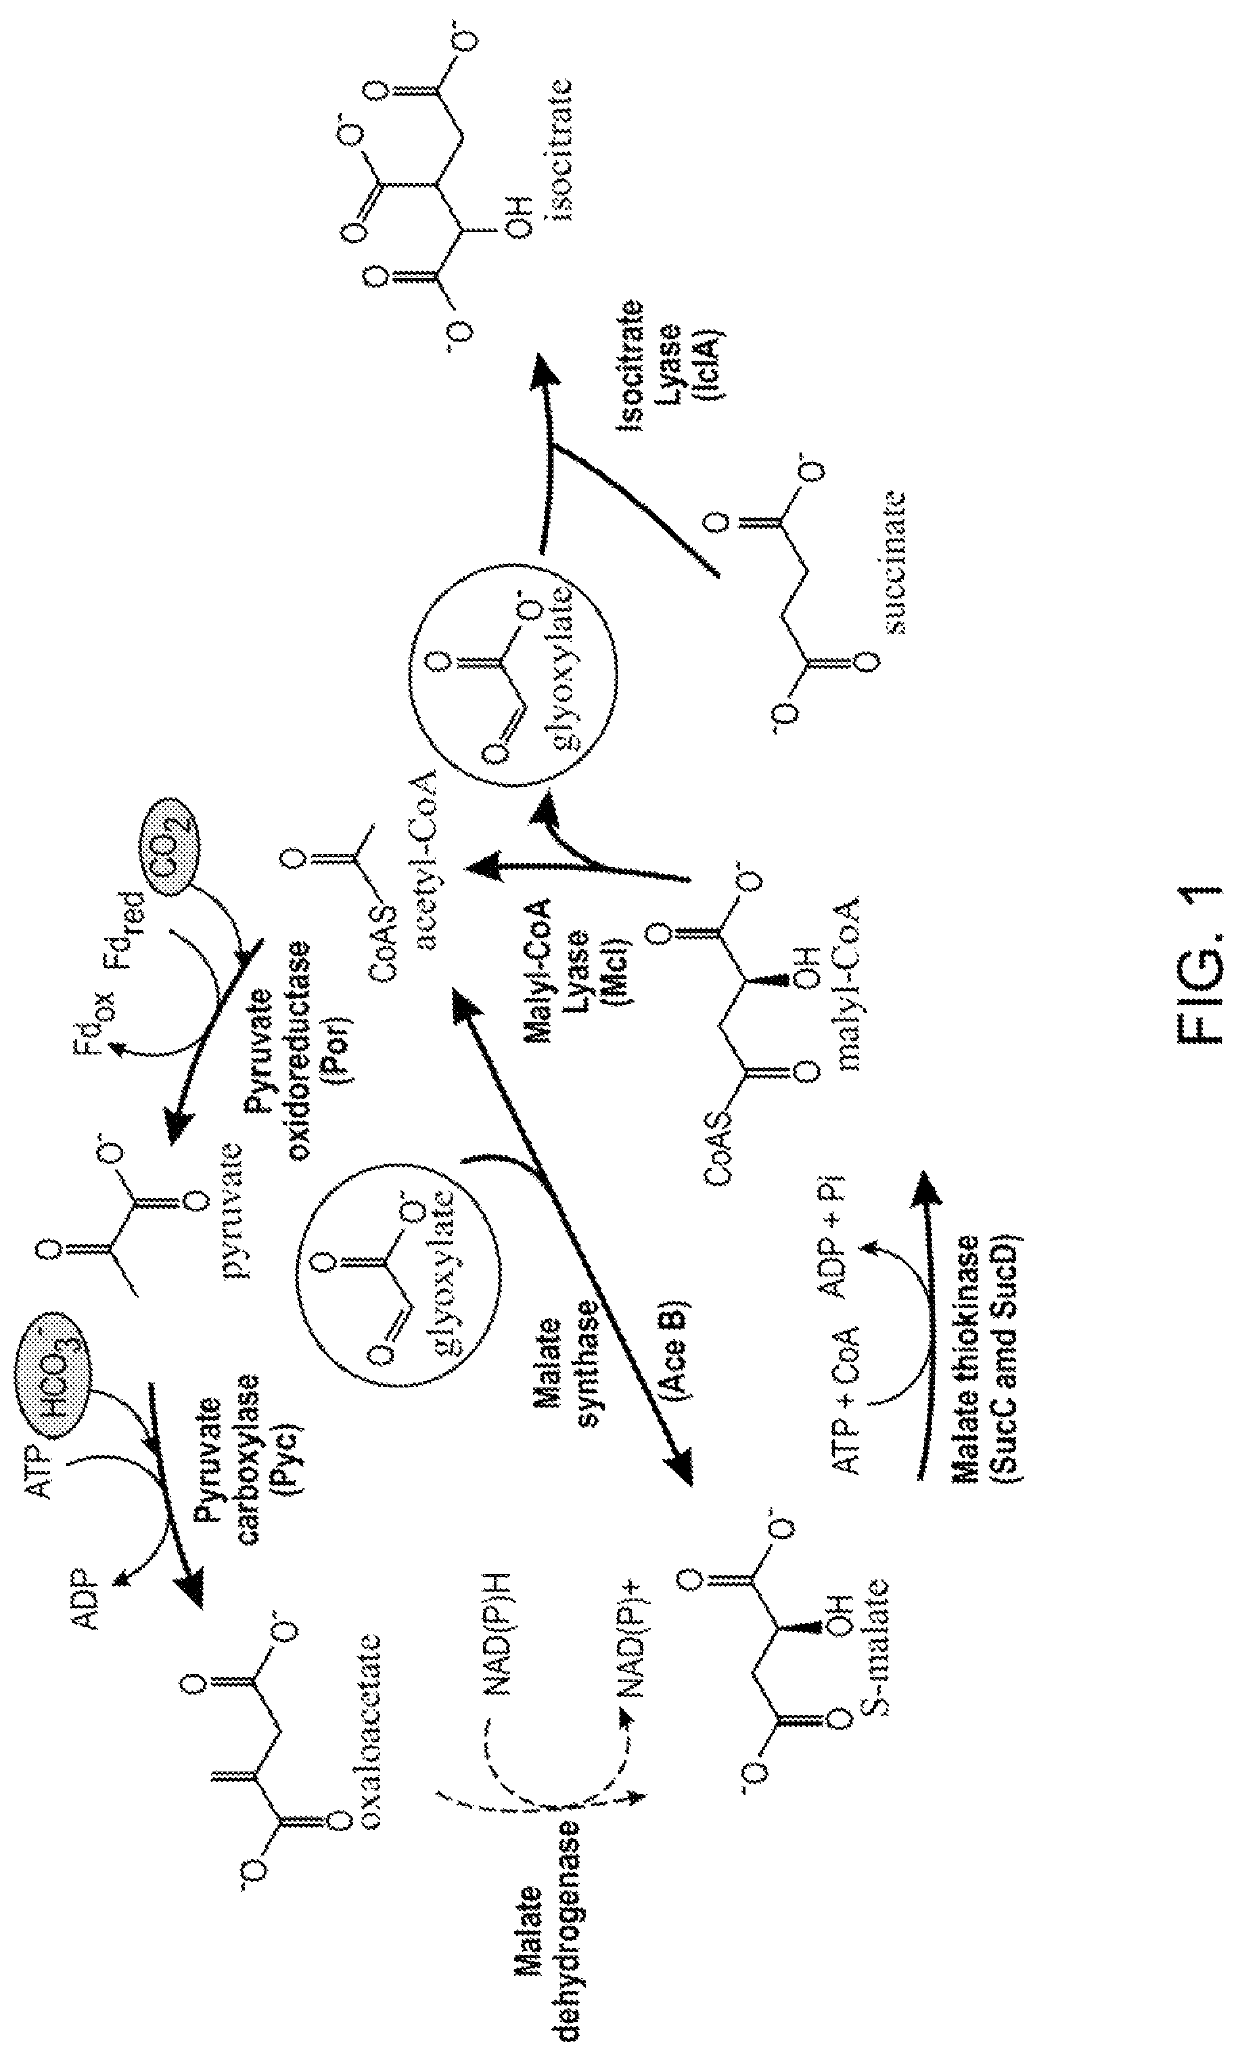 Plants with enhanced yield and methods of construction